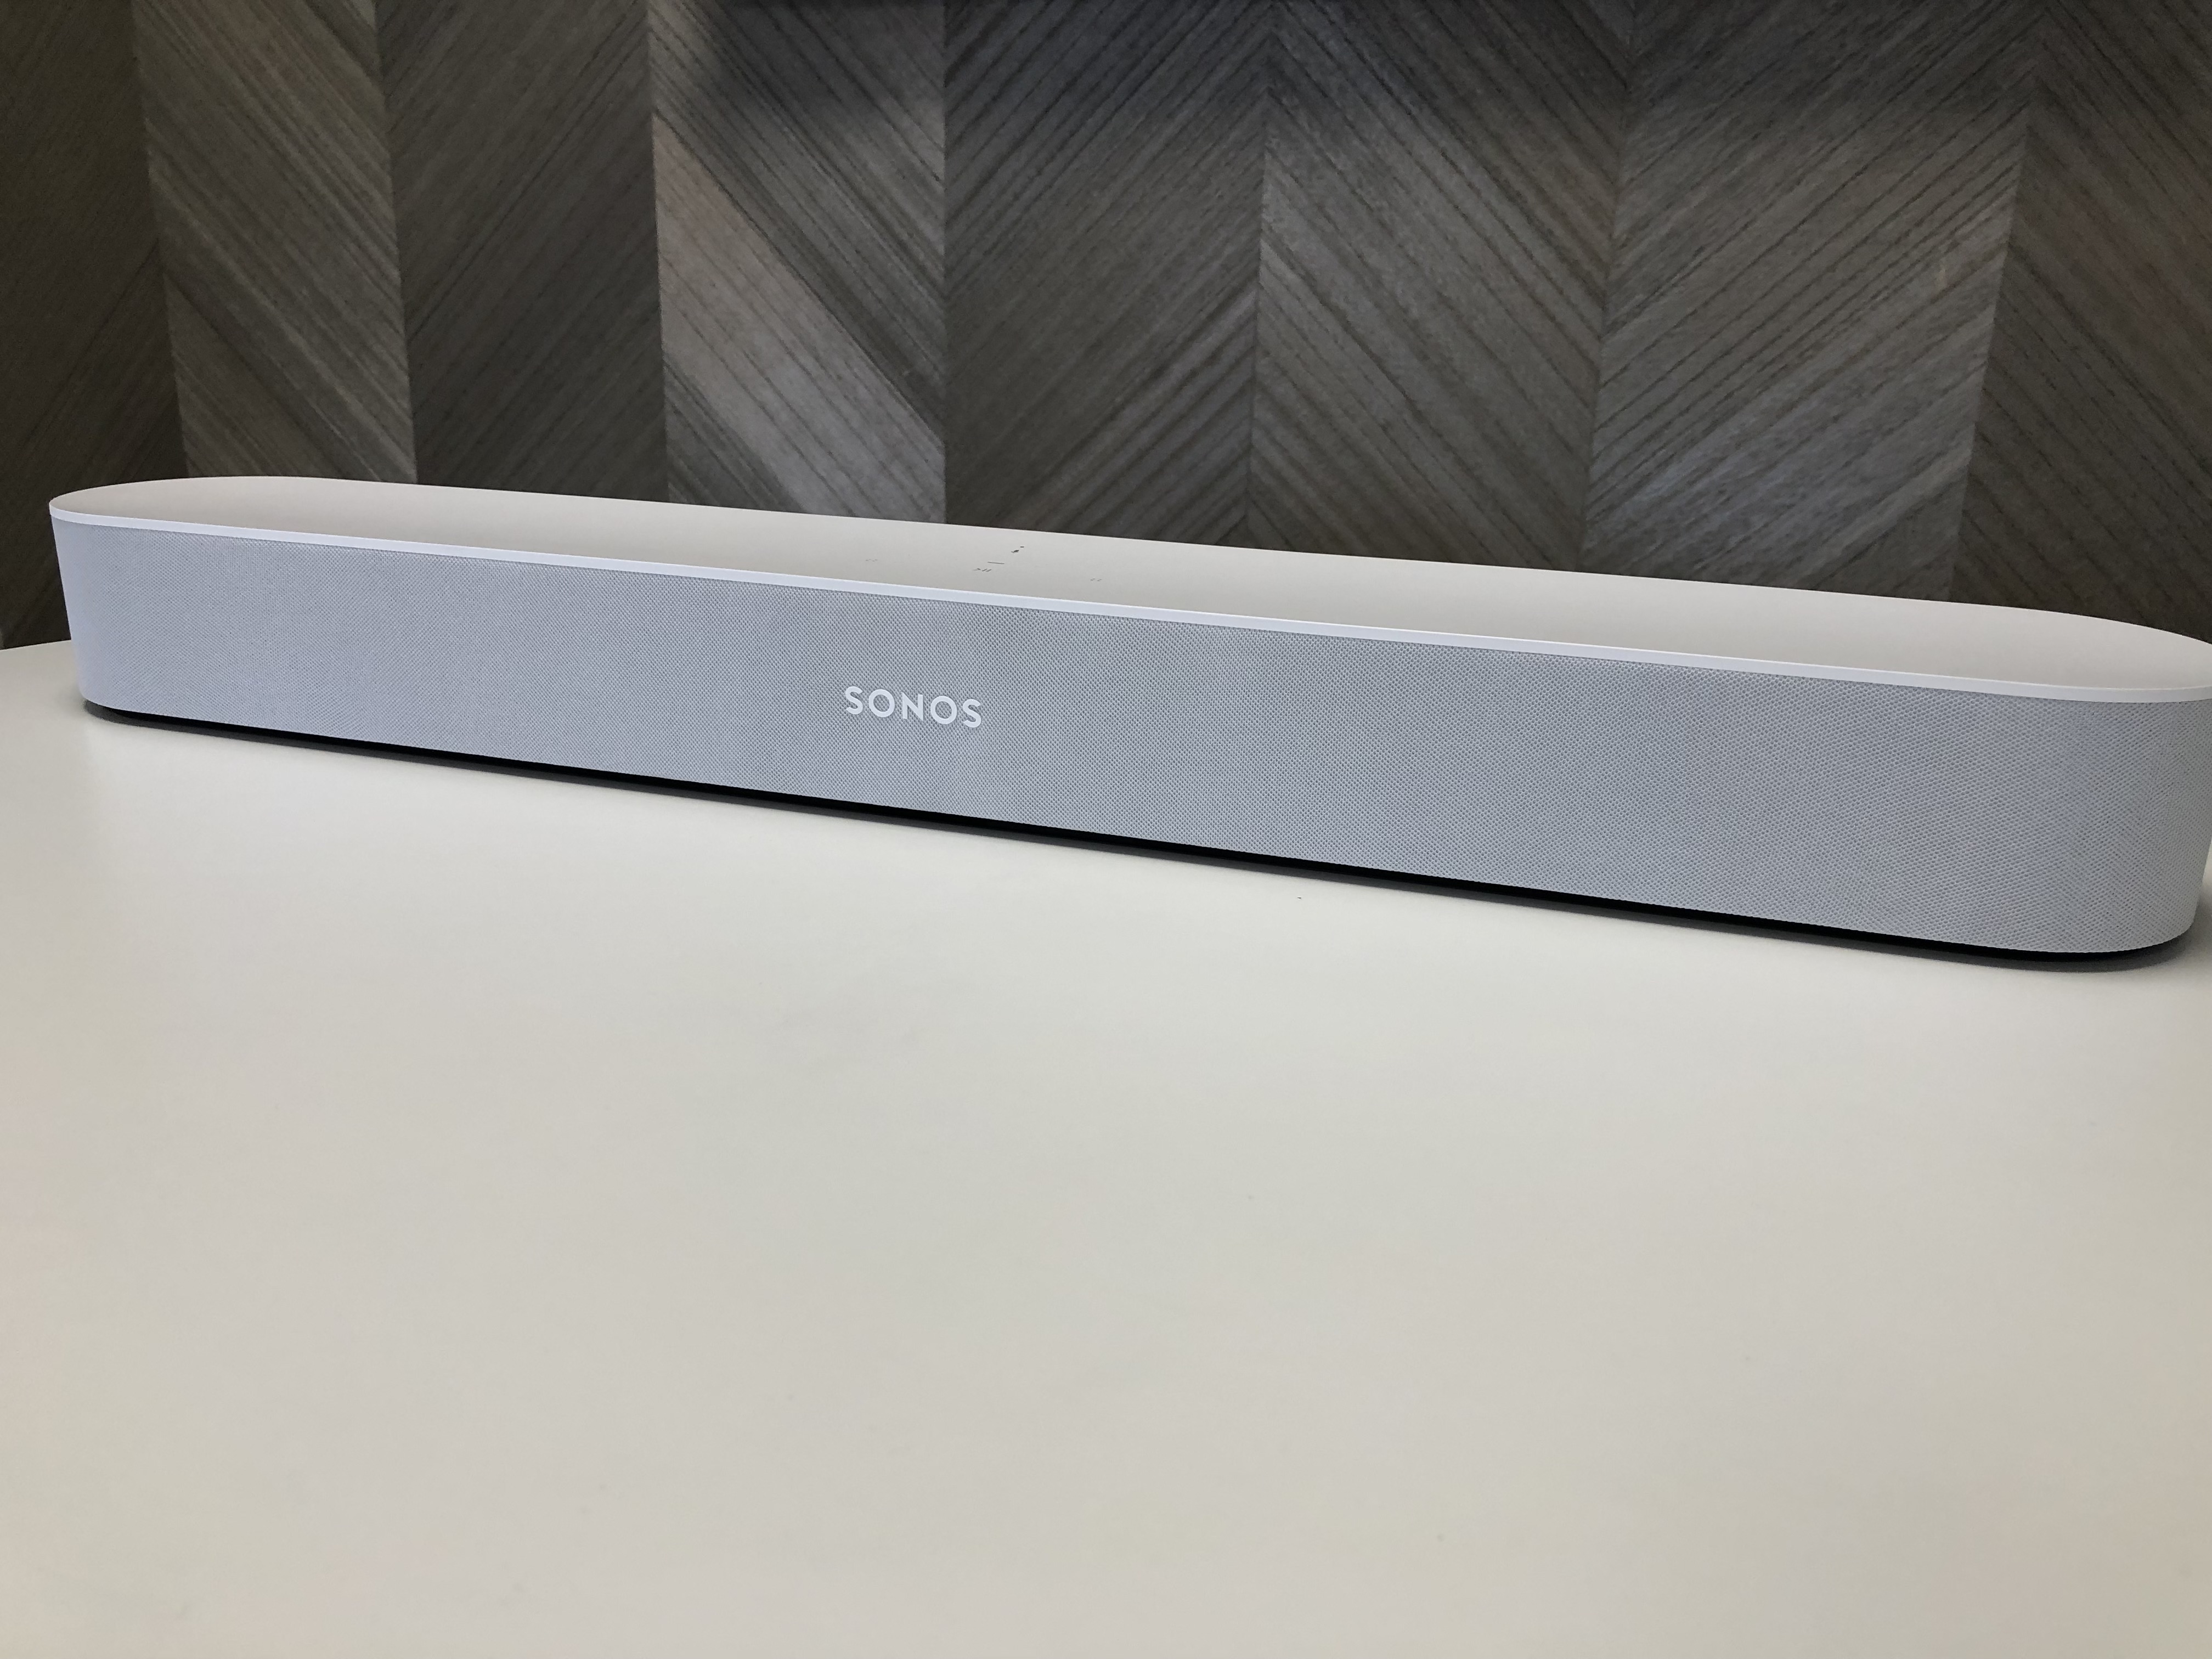 10 Features about the Sonos Beam you'll Love